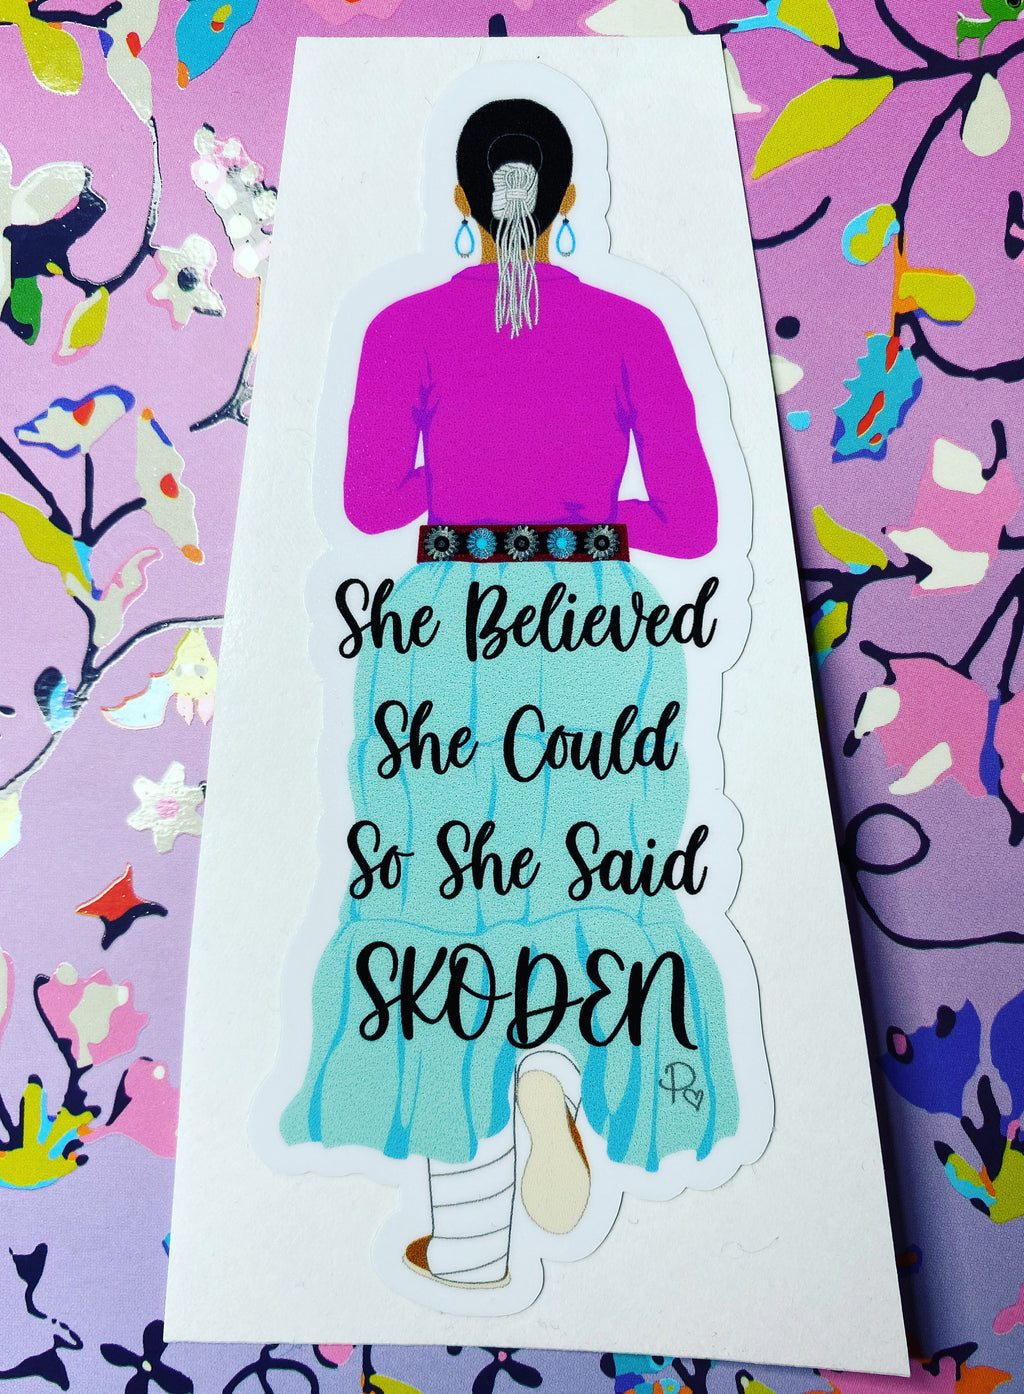 She Believed She Could So She Said, Skoden - Pink